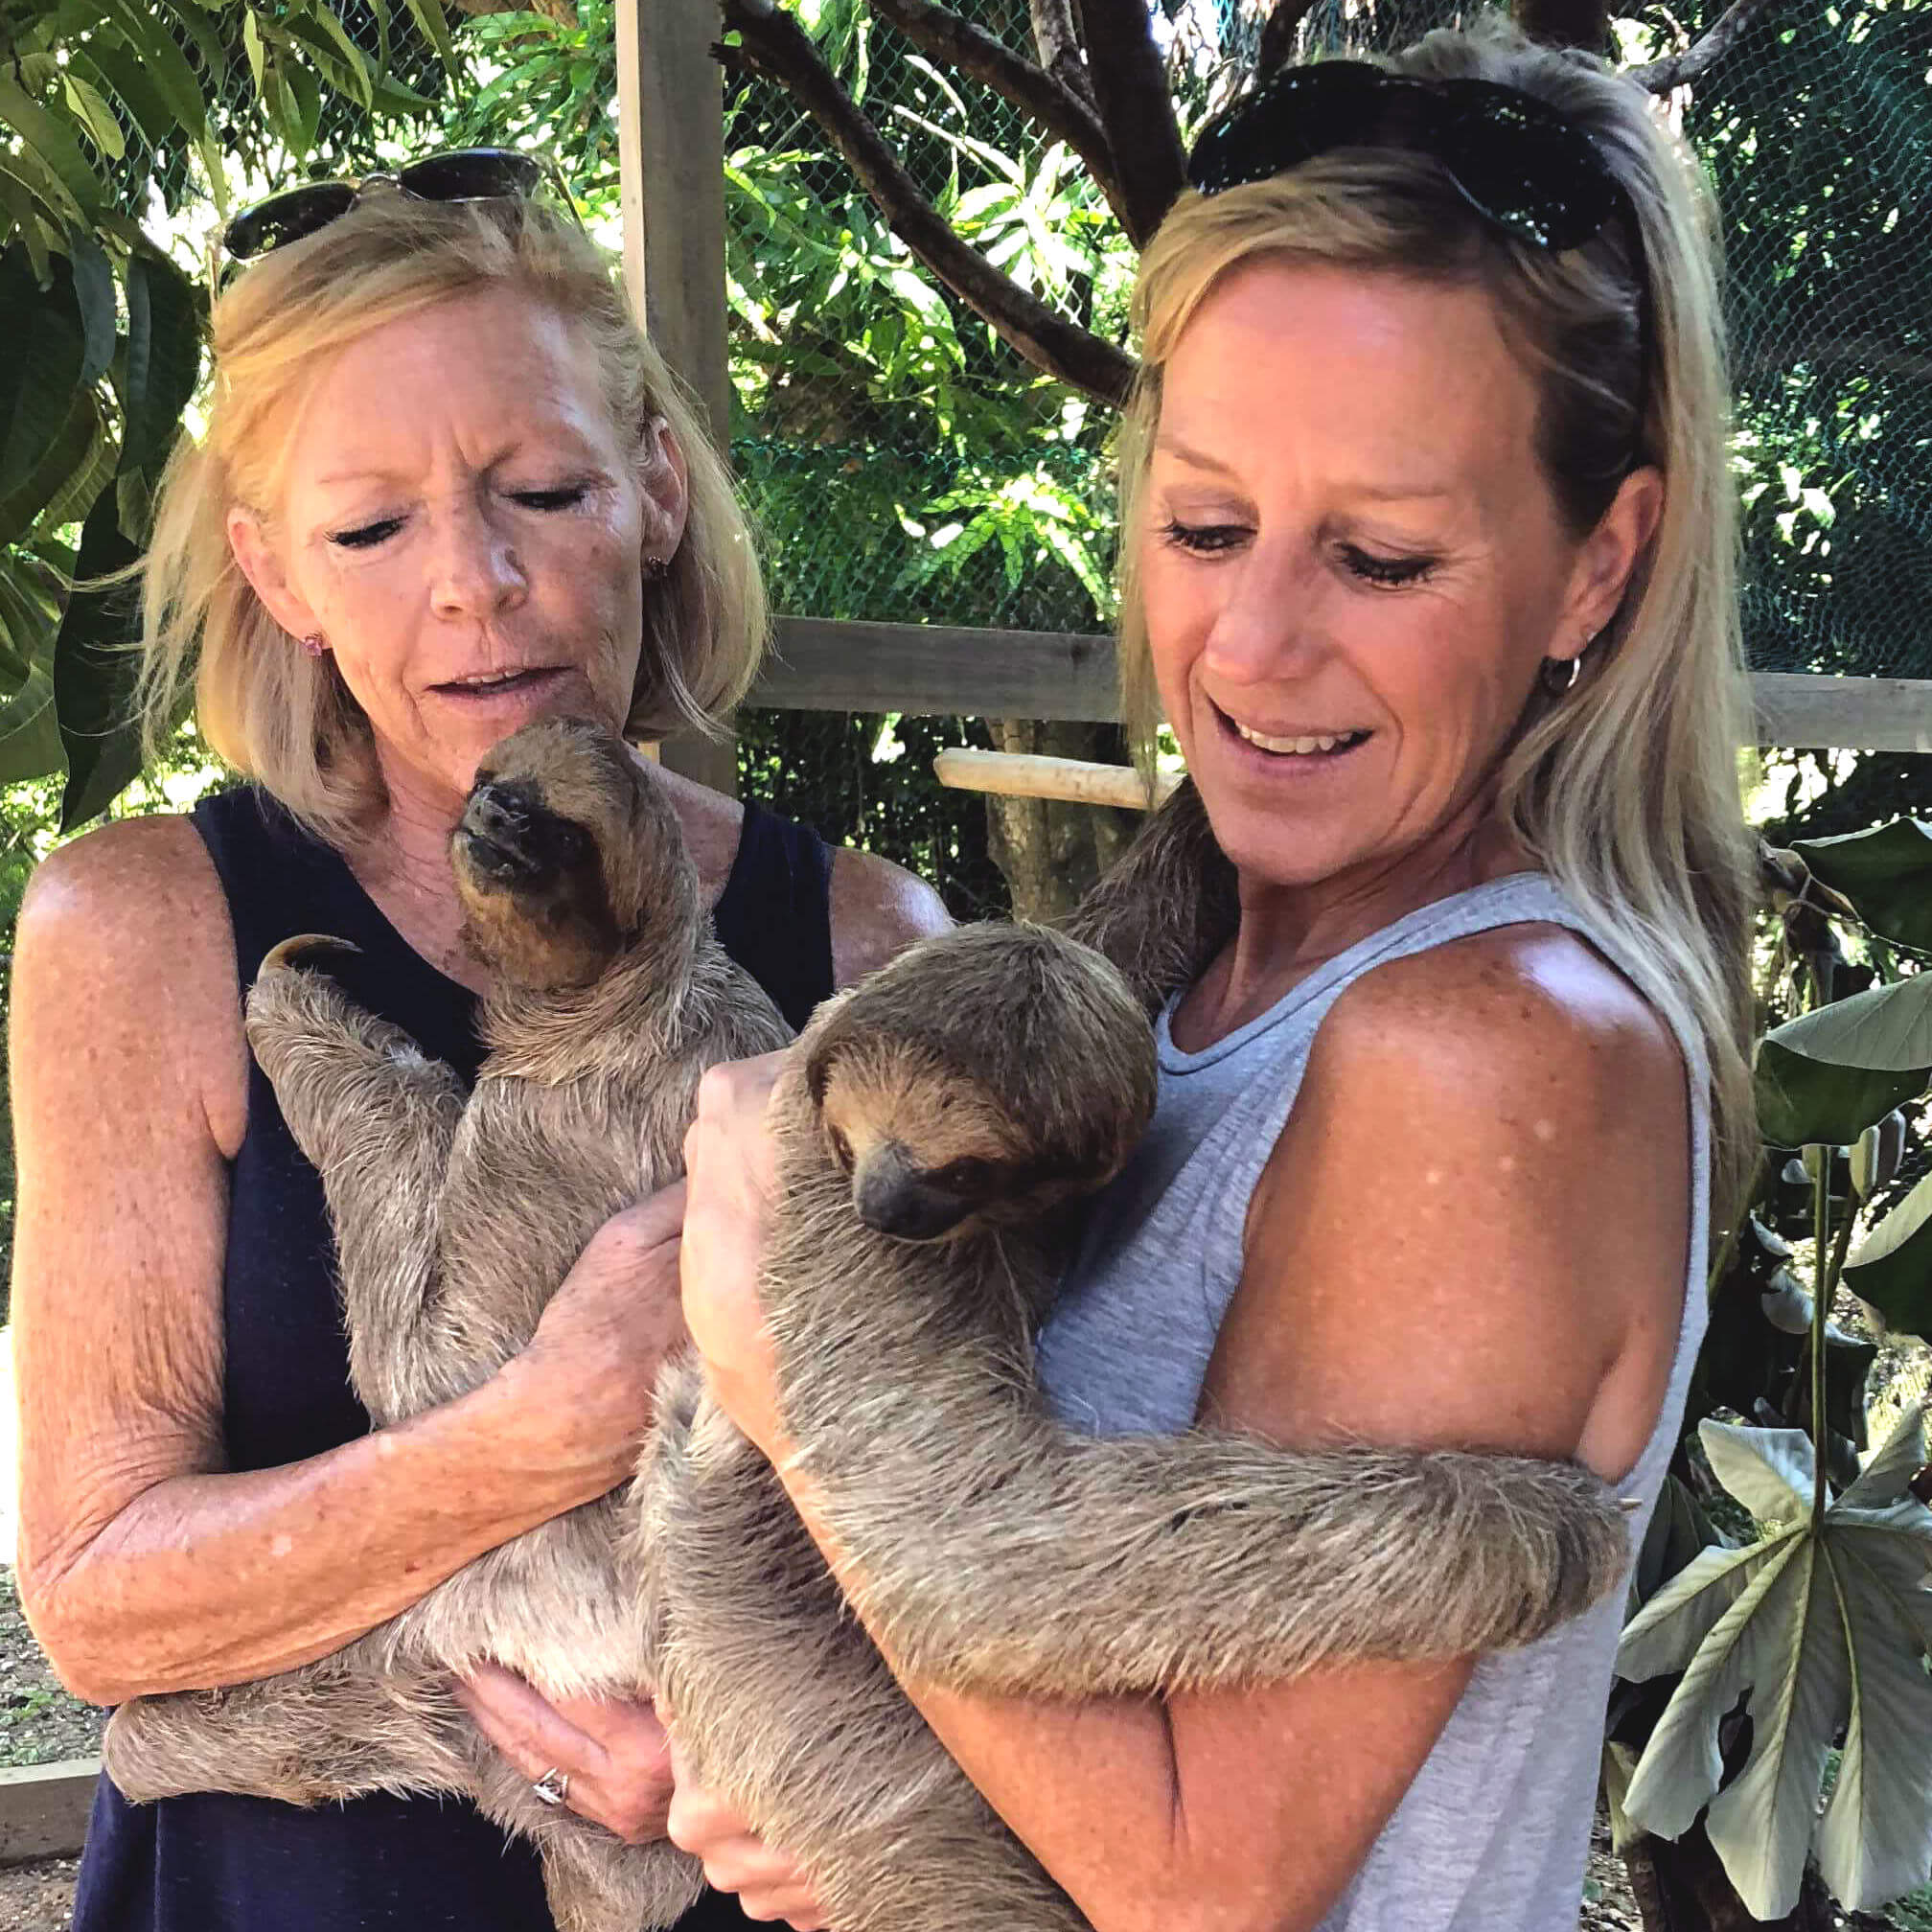 Babette gets some snuggles in with a sloth encounter...